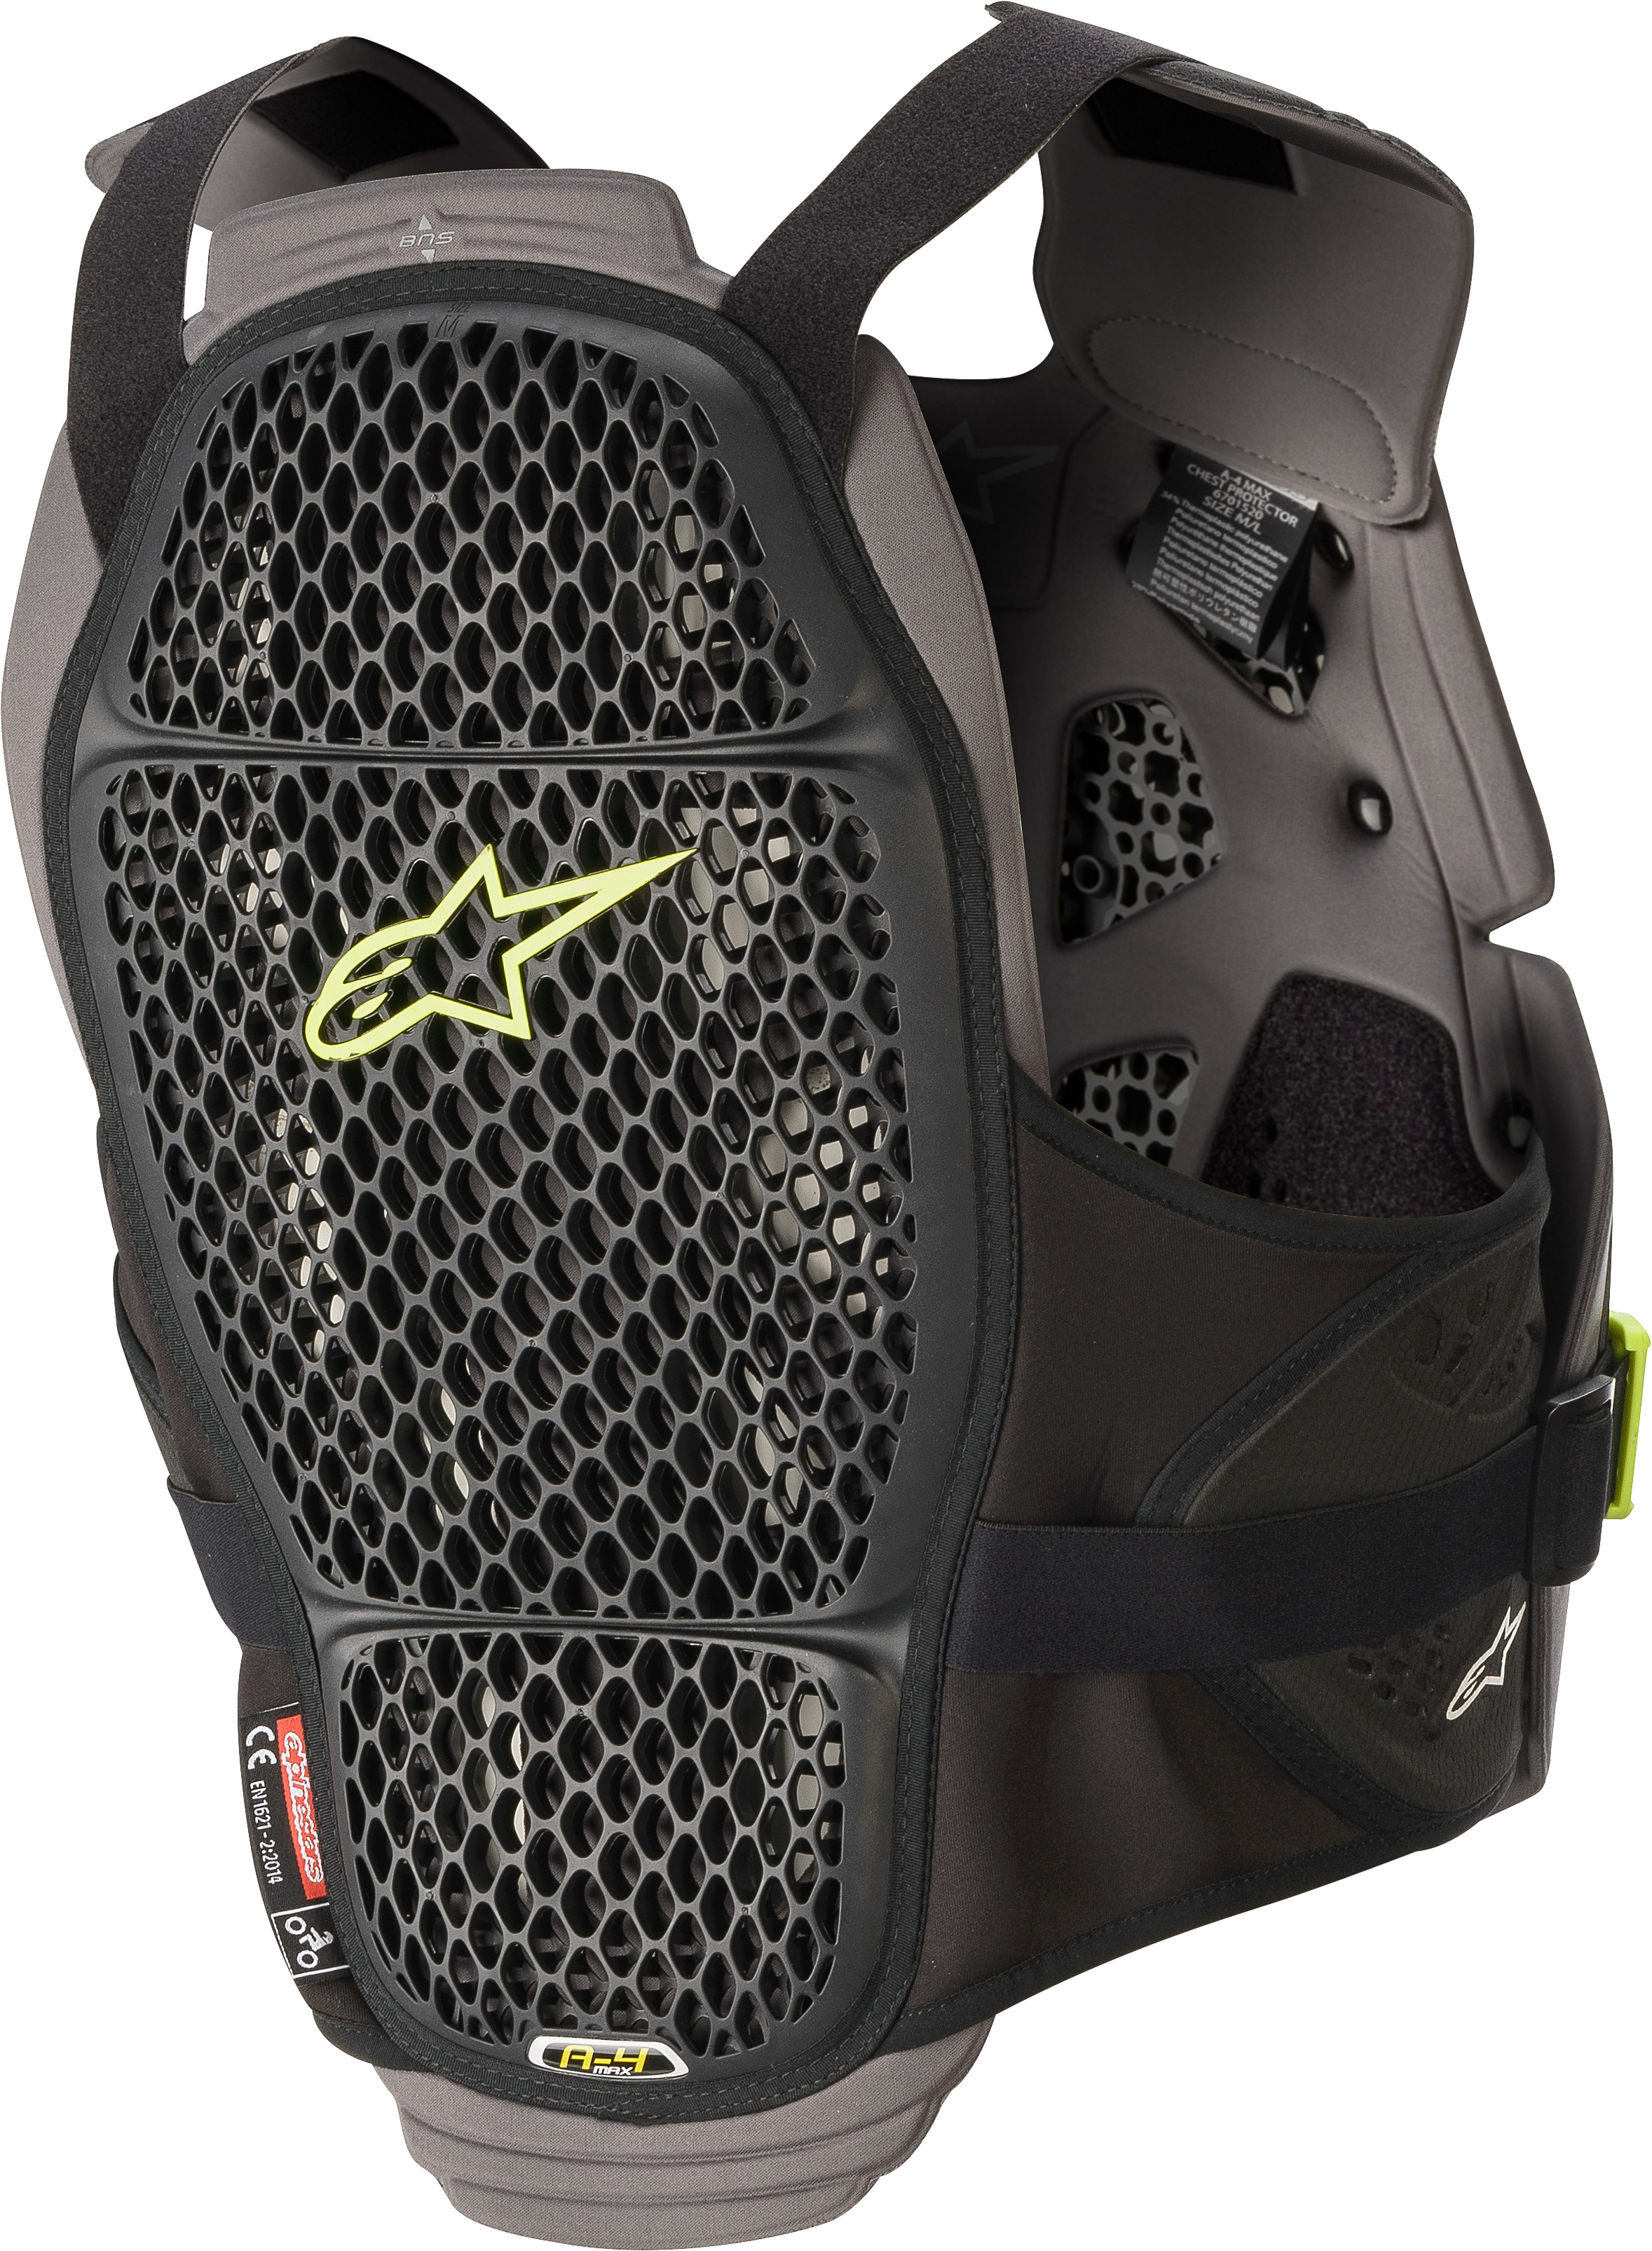 A-4 Max Chest Protector - Black/Anth/Fluo Yellow - Medium/Large - Click Image to Close